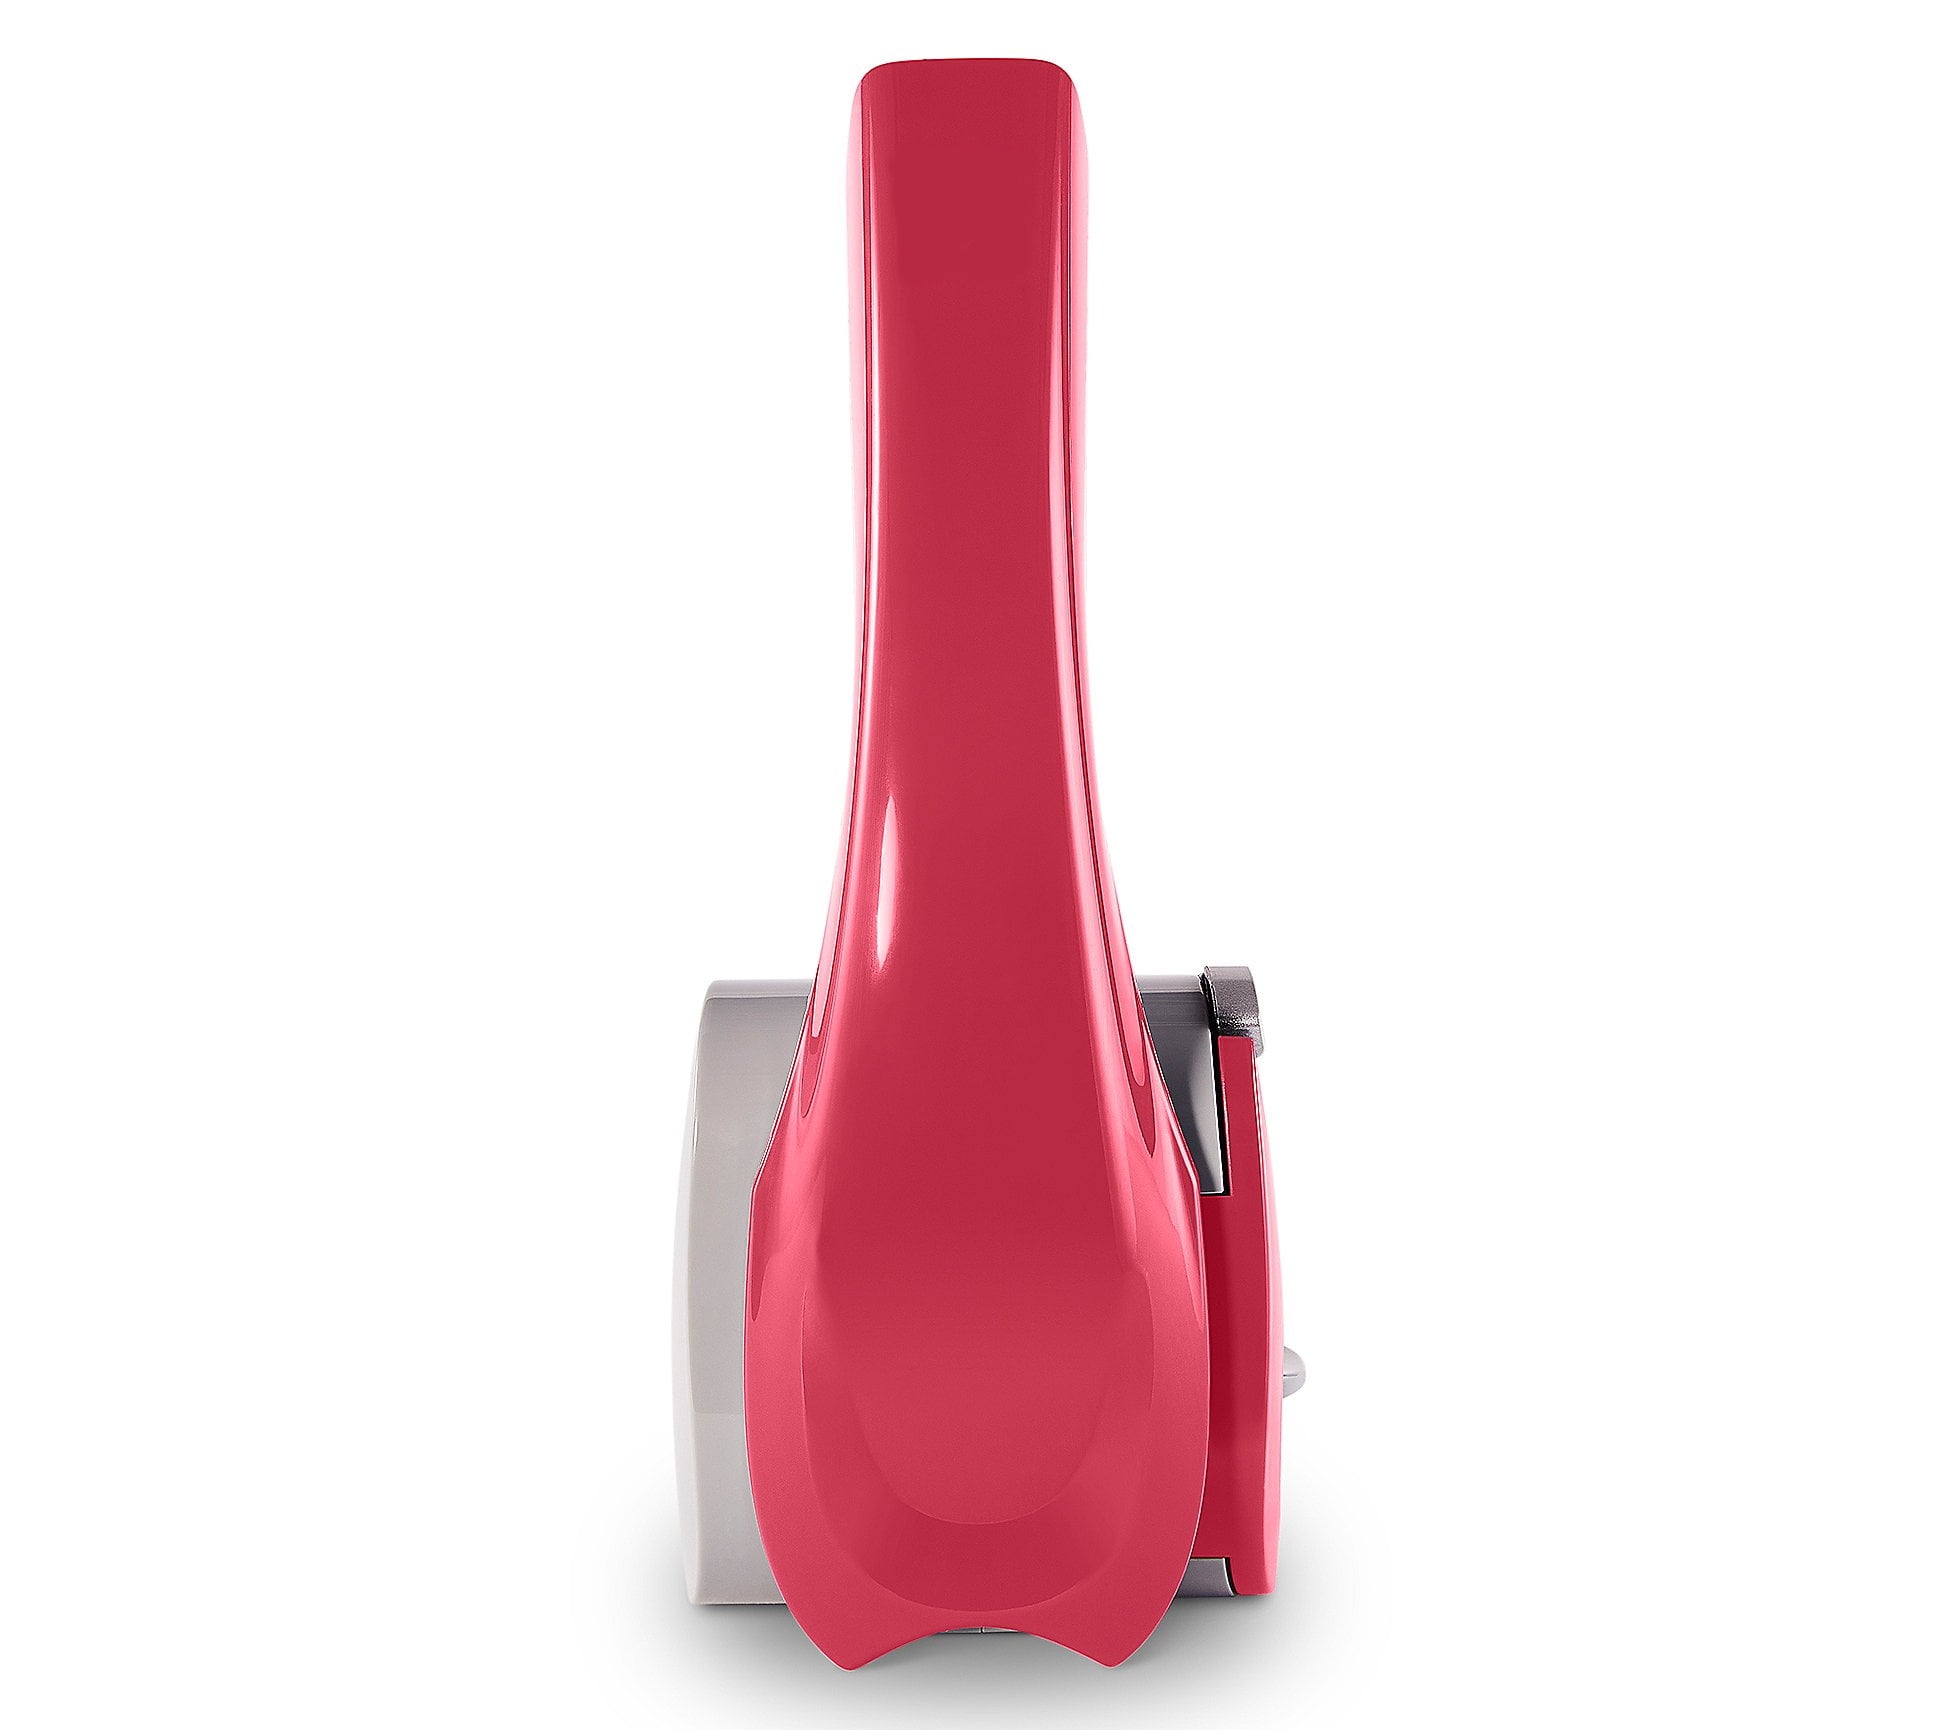 Geedel PS-336AR1 Rotary Cheese Grater - Red for sale online